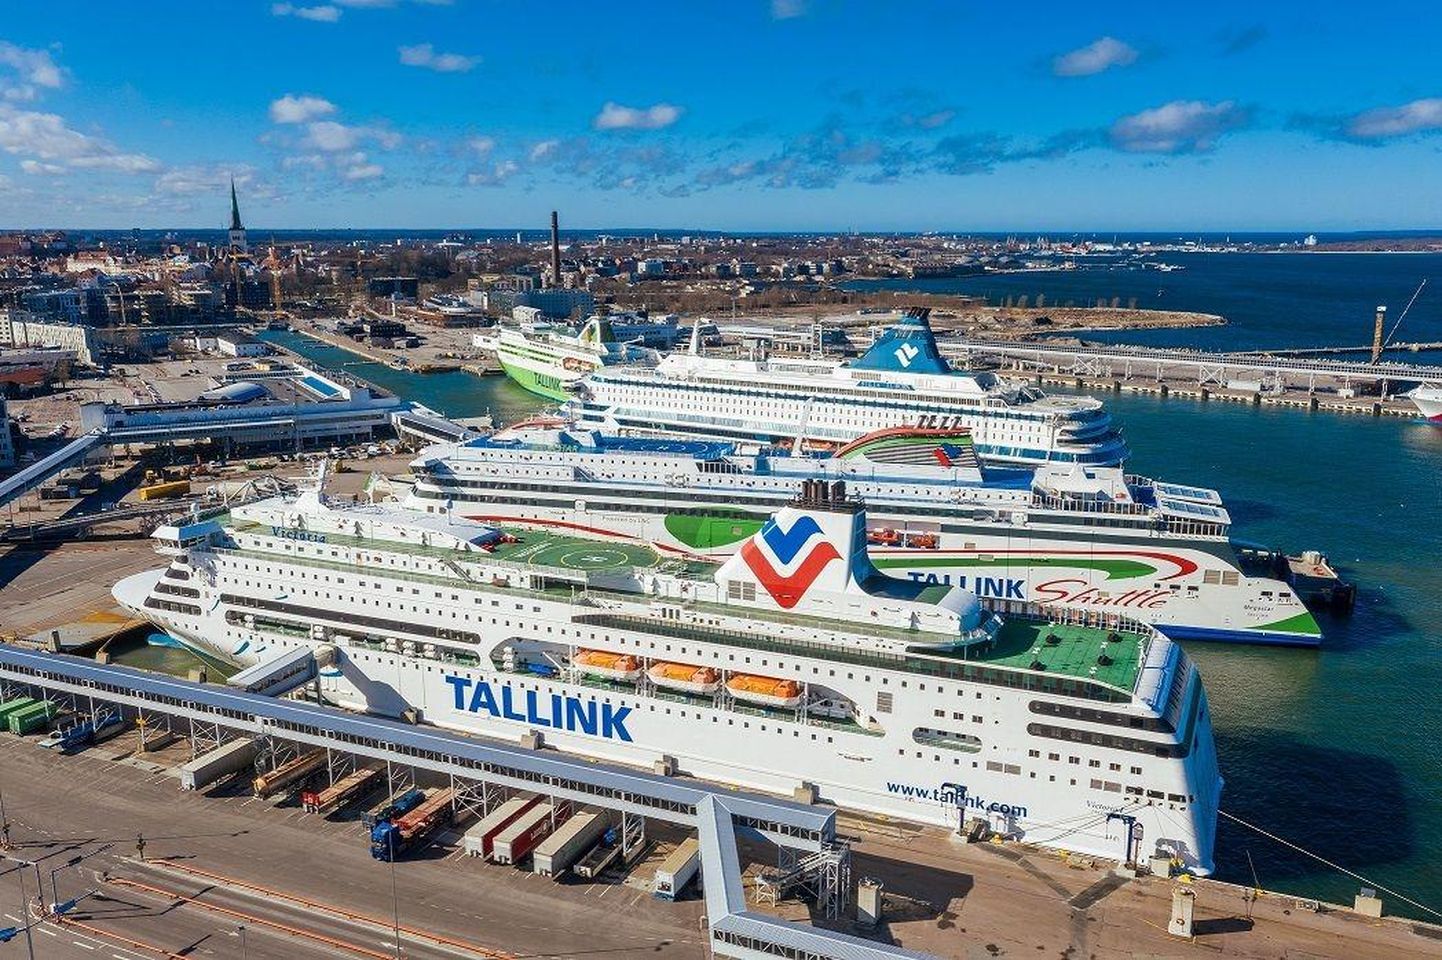 Tallink said that the results are hardly surprising as the global health and economic crisis cut its number of passengers by 62 percent compared to 2019.